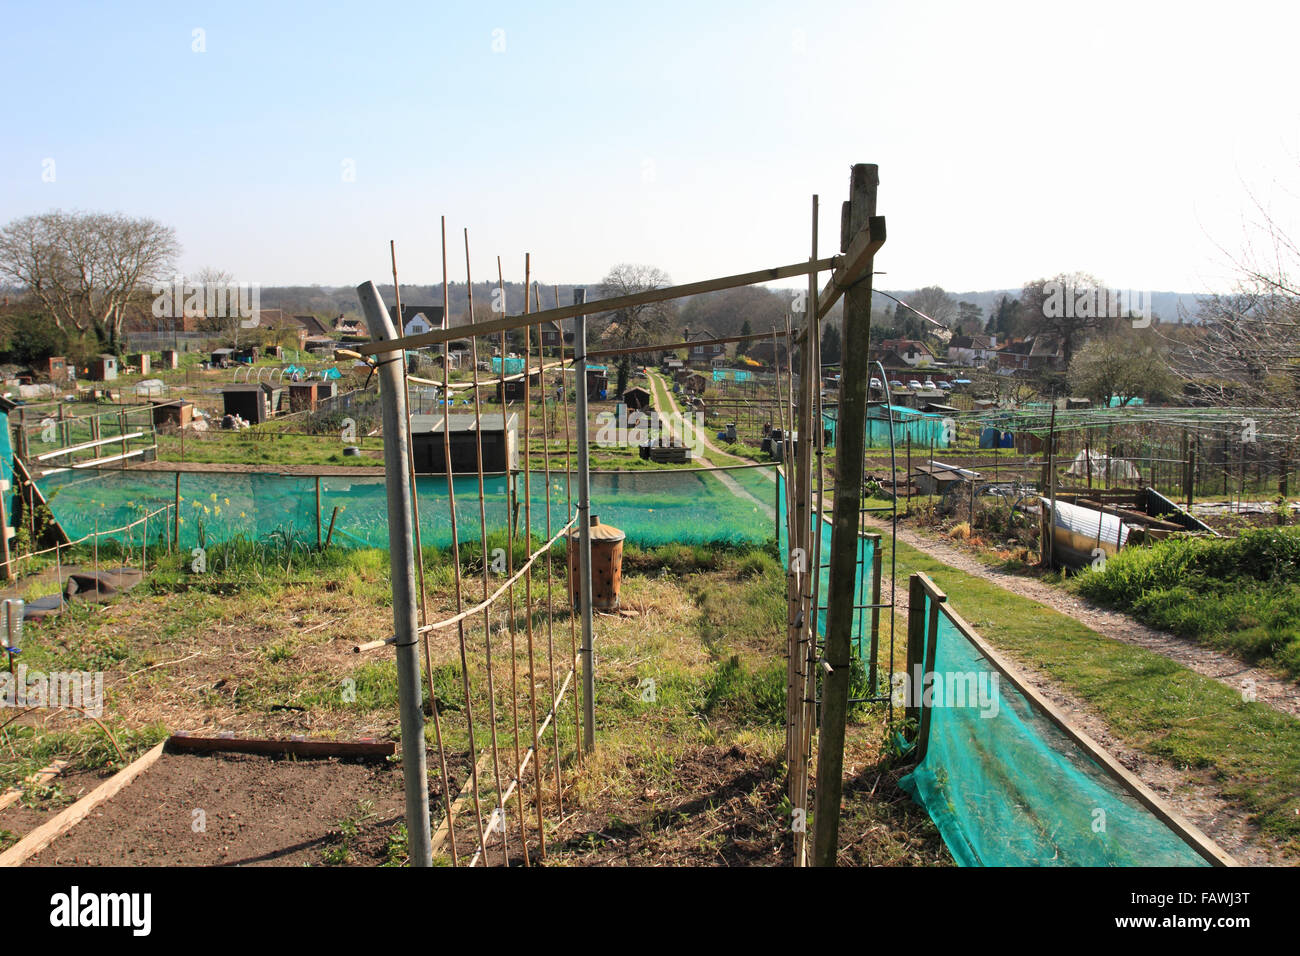 Allotment, vegetable plots, gardening in summer tome.Norwich,Norfolk,UK Stock Photo